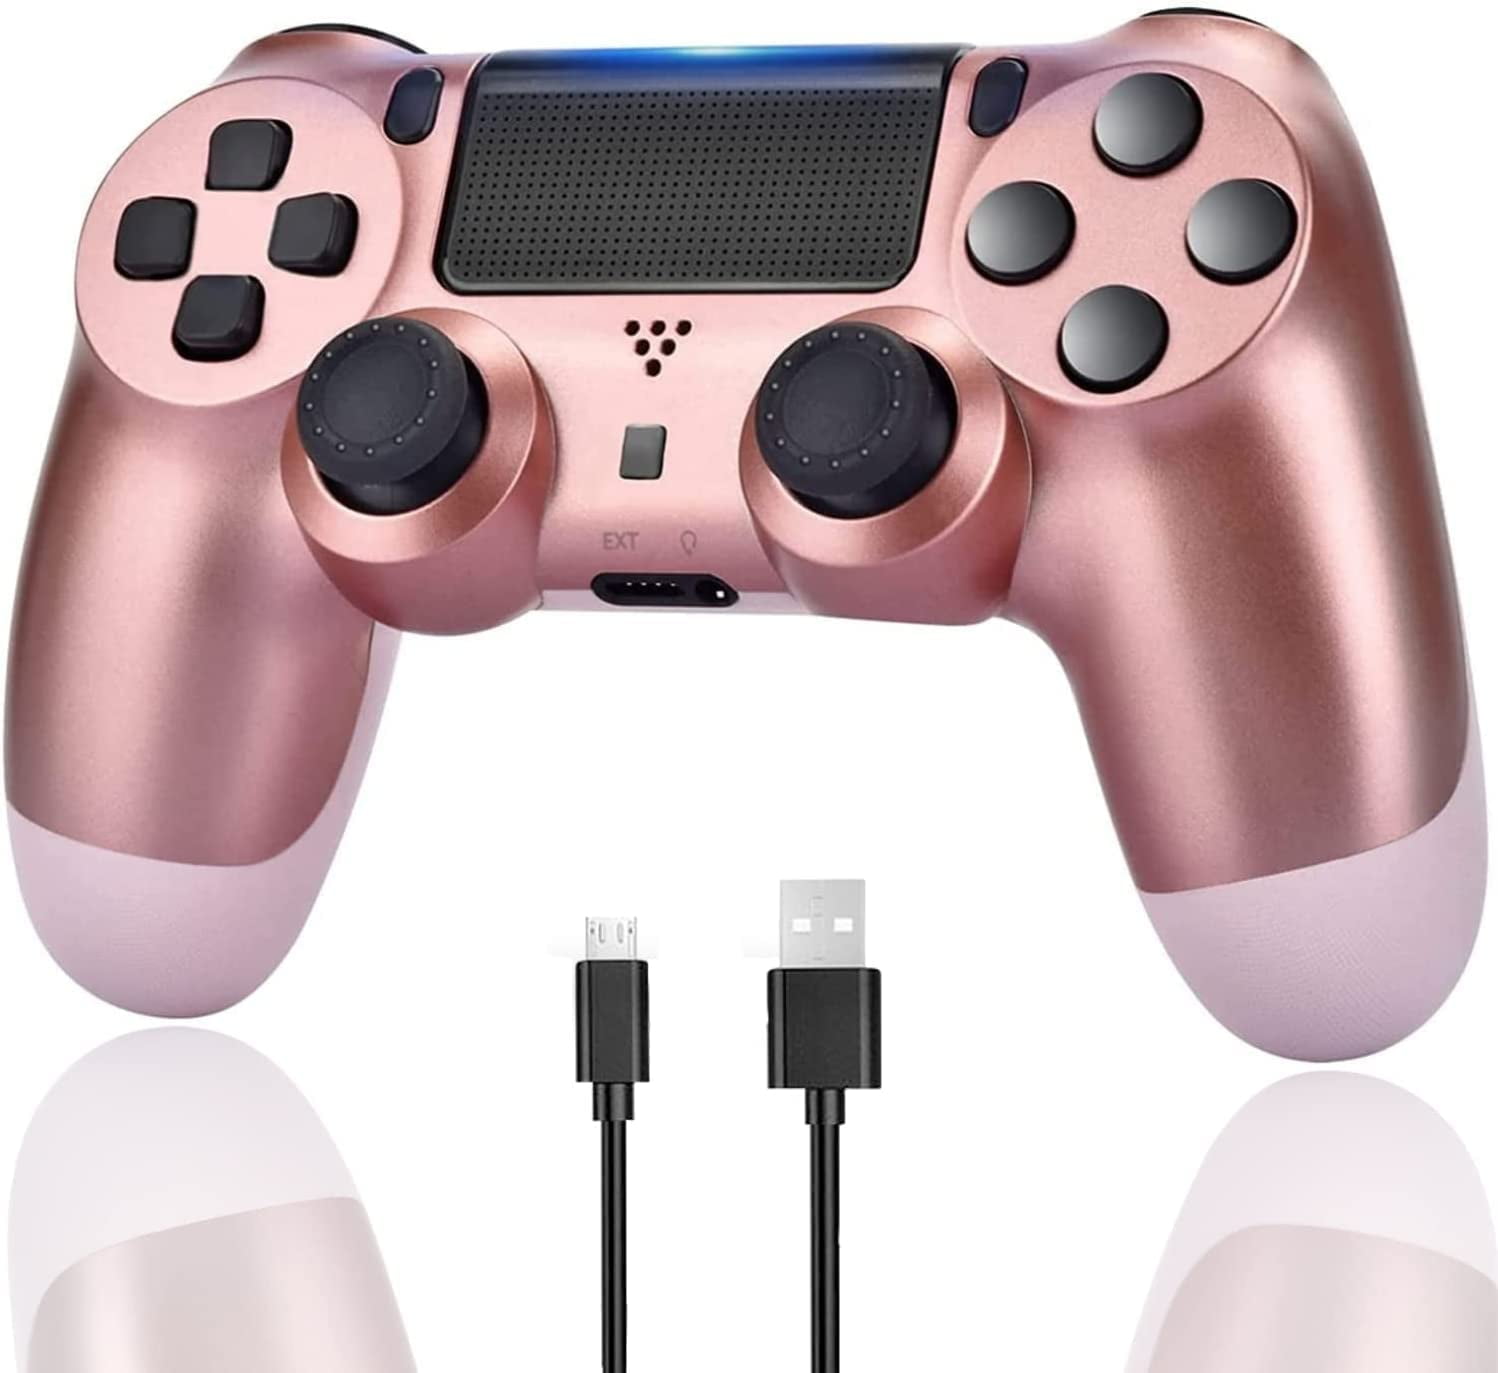 SPBPQY Wireless Controller with Pro/PS4 Slim, Rose Gold - Walmart.com